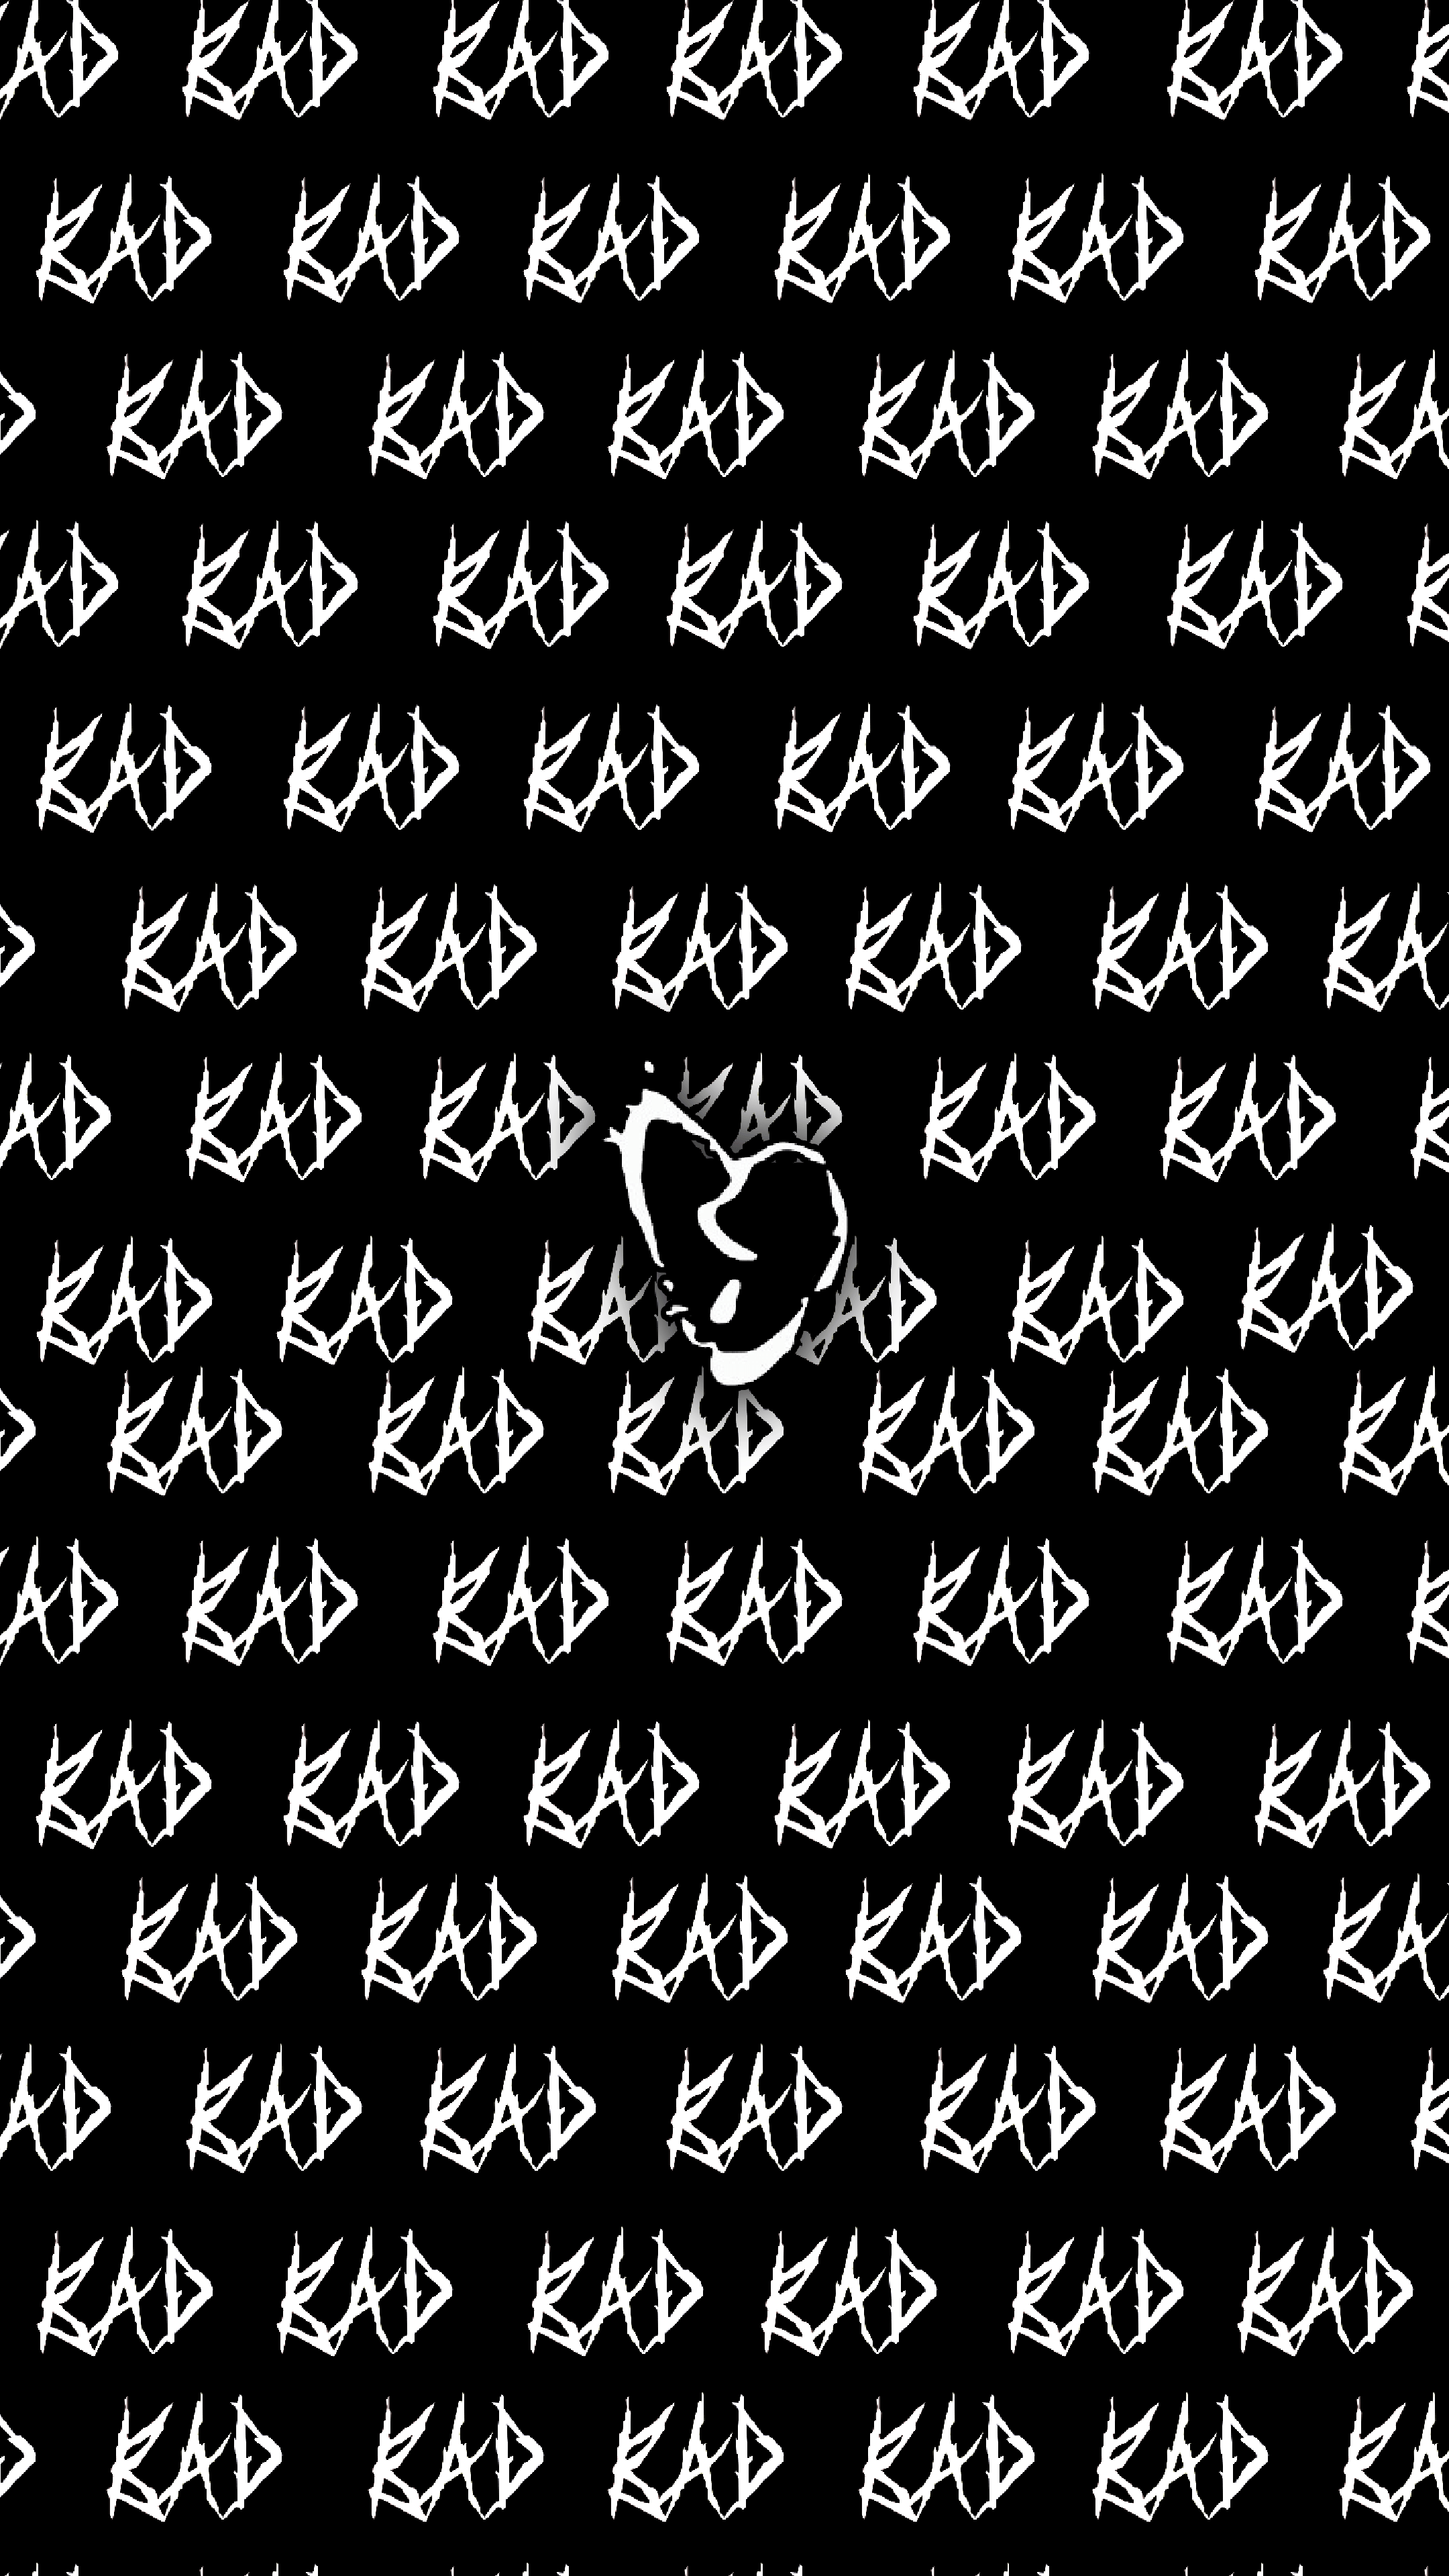 Here is another wallpaper i made